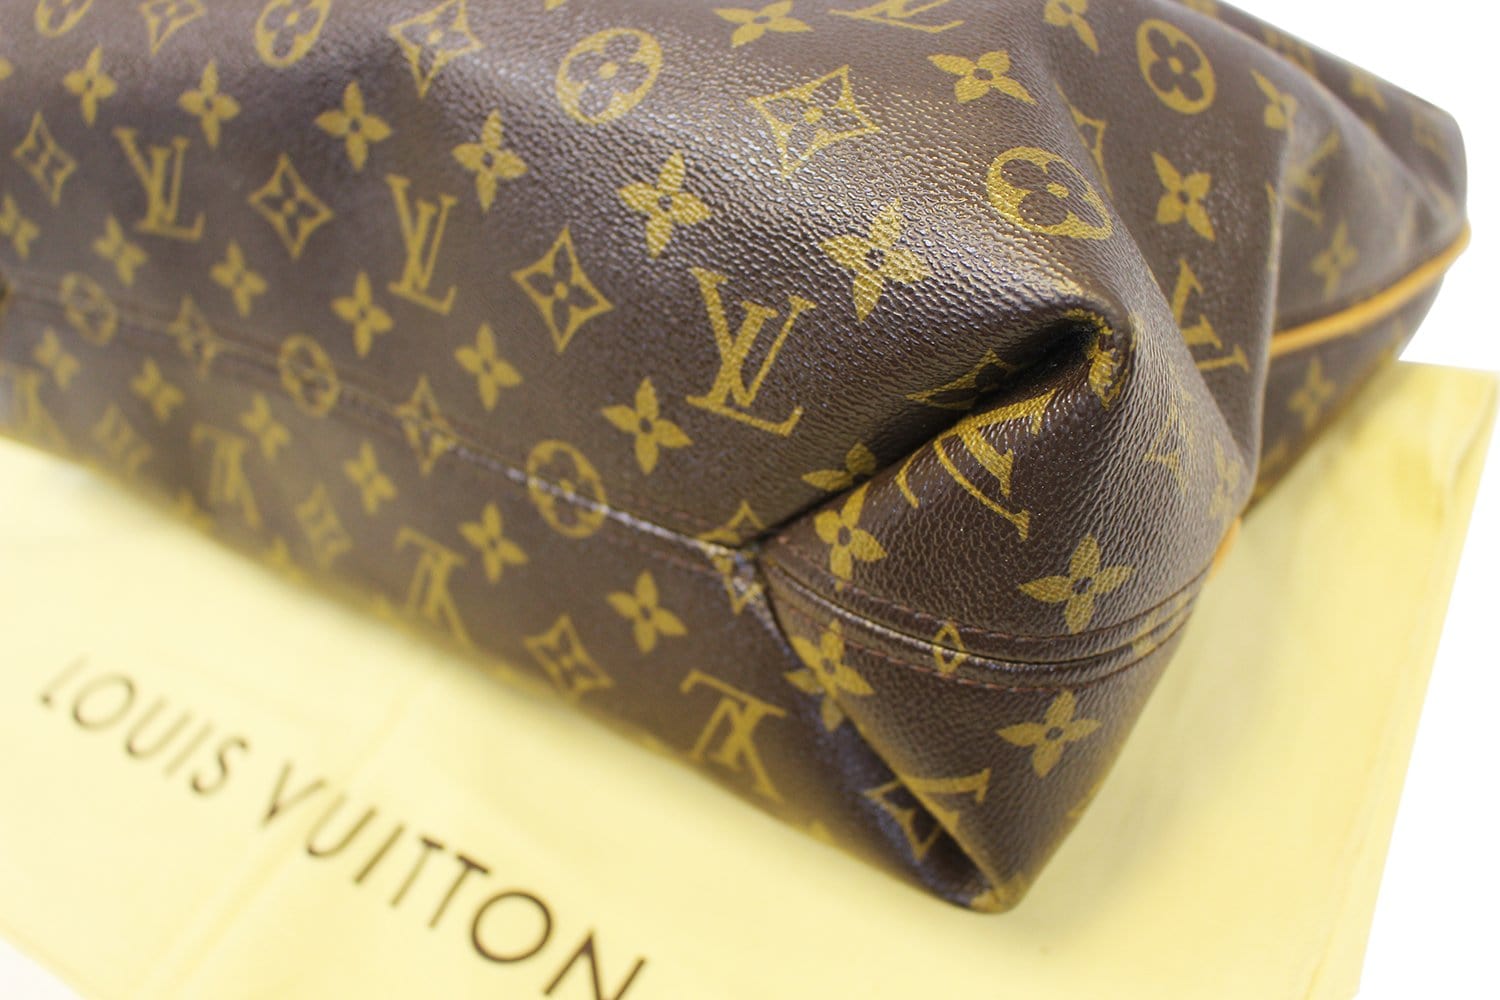 louis vuitton pre-loved monogram canvas neverfull mm, brown